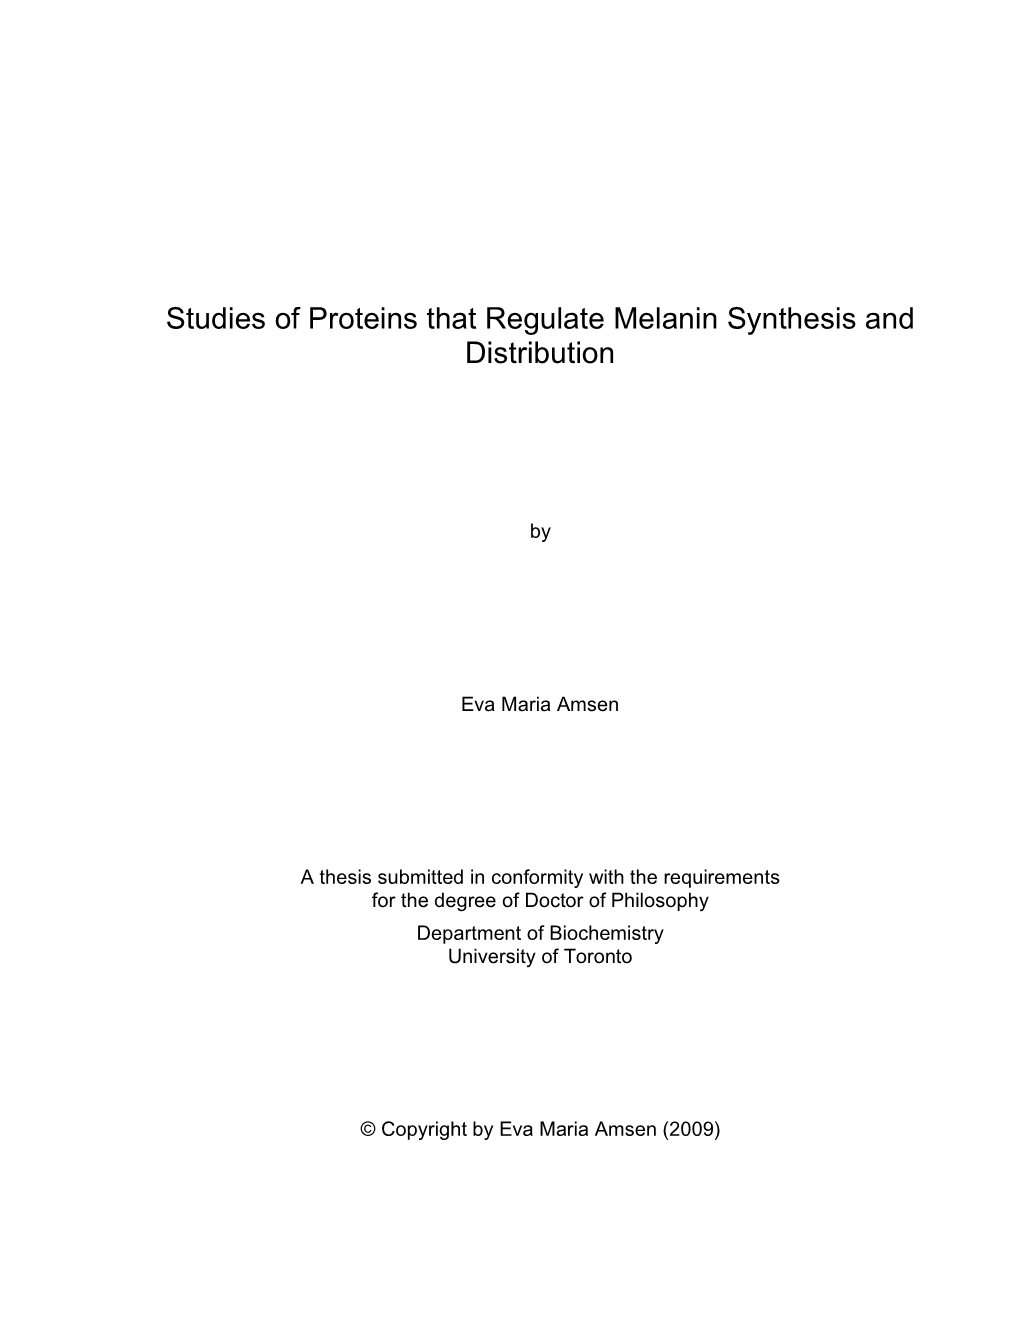 Studies of Proteins That Regulate Melanin Synthesis and Distribution